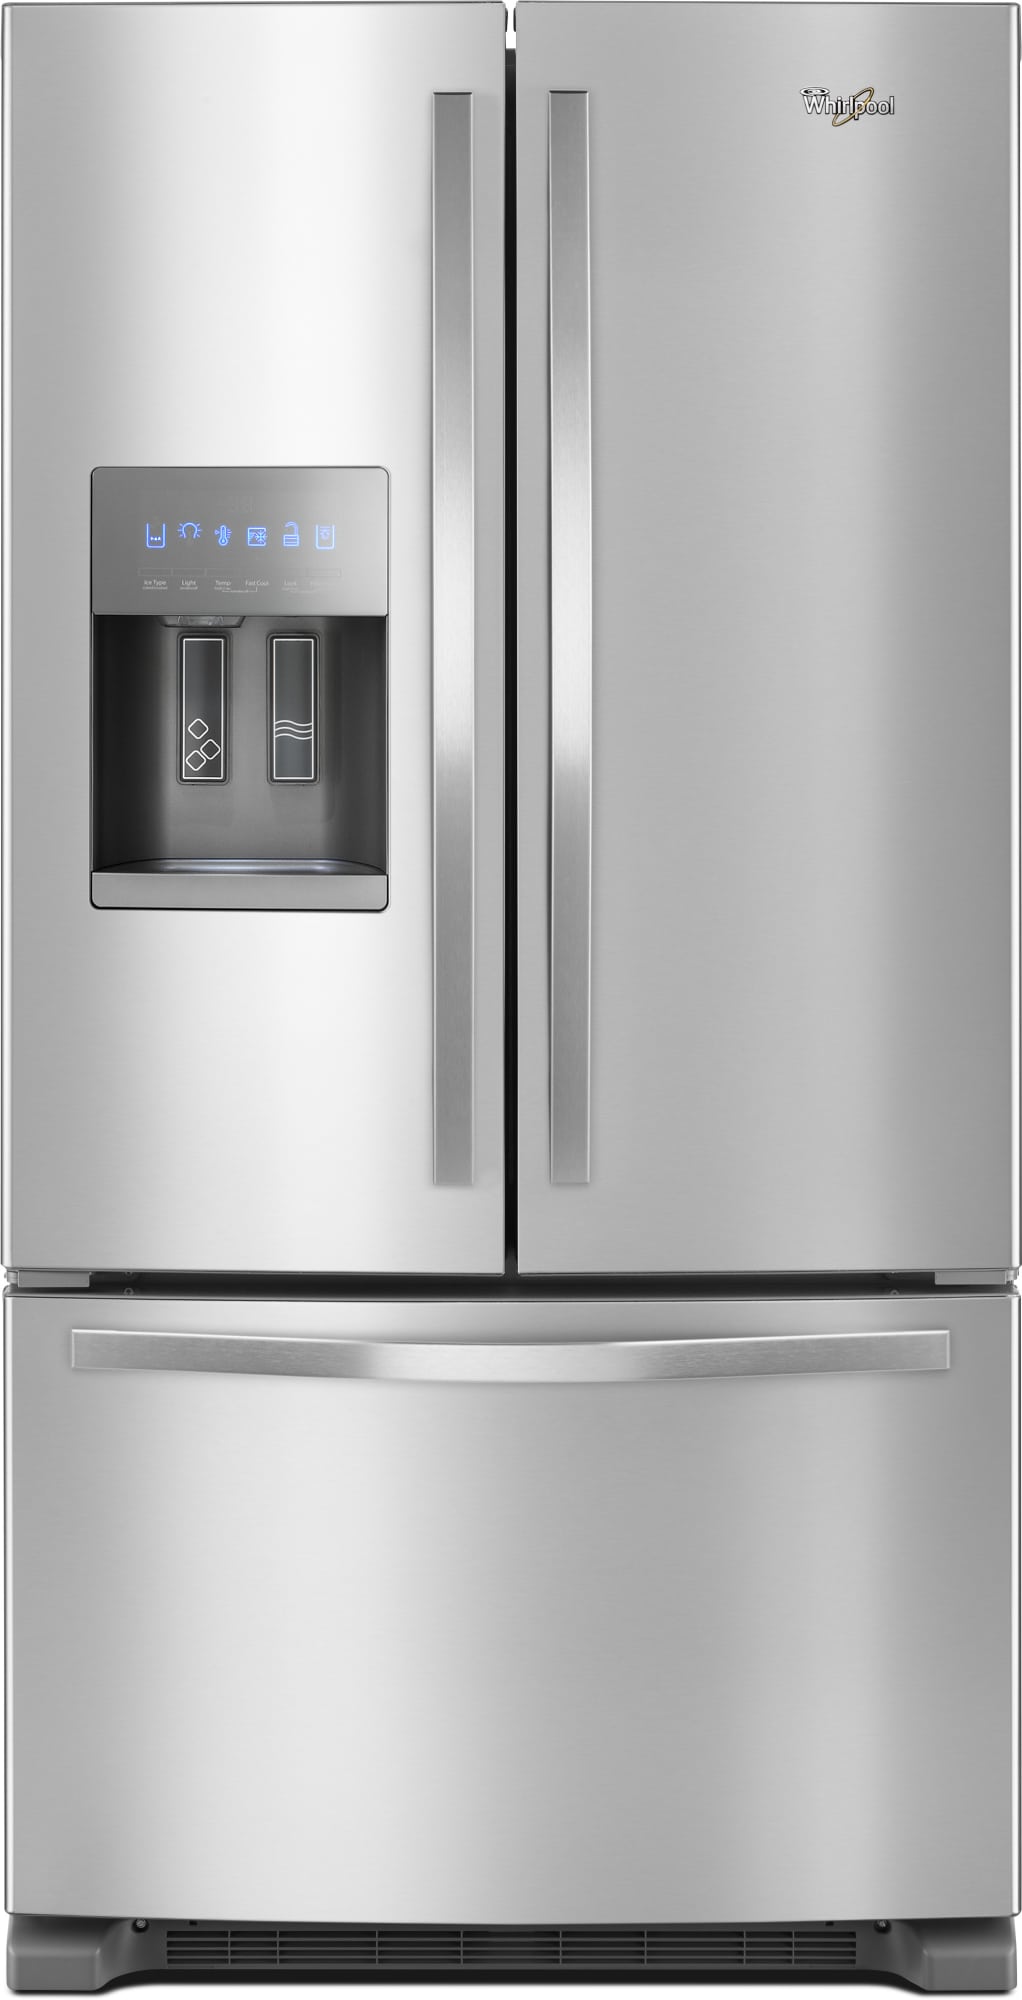 Whirlpool WRF555SDFZ 36 Inch French Door Refrigerator with 25 Cu. Ft